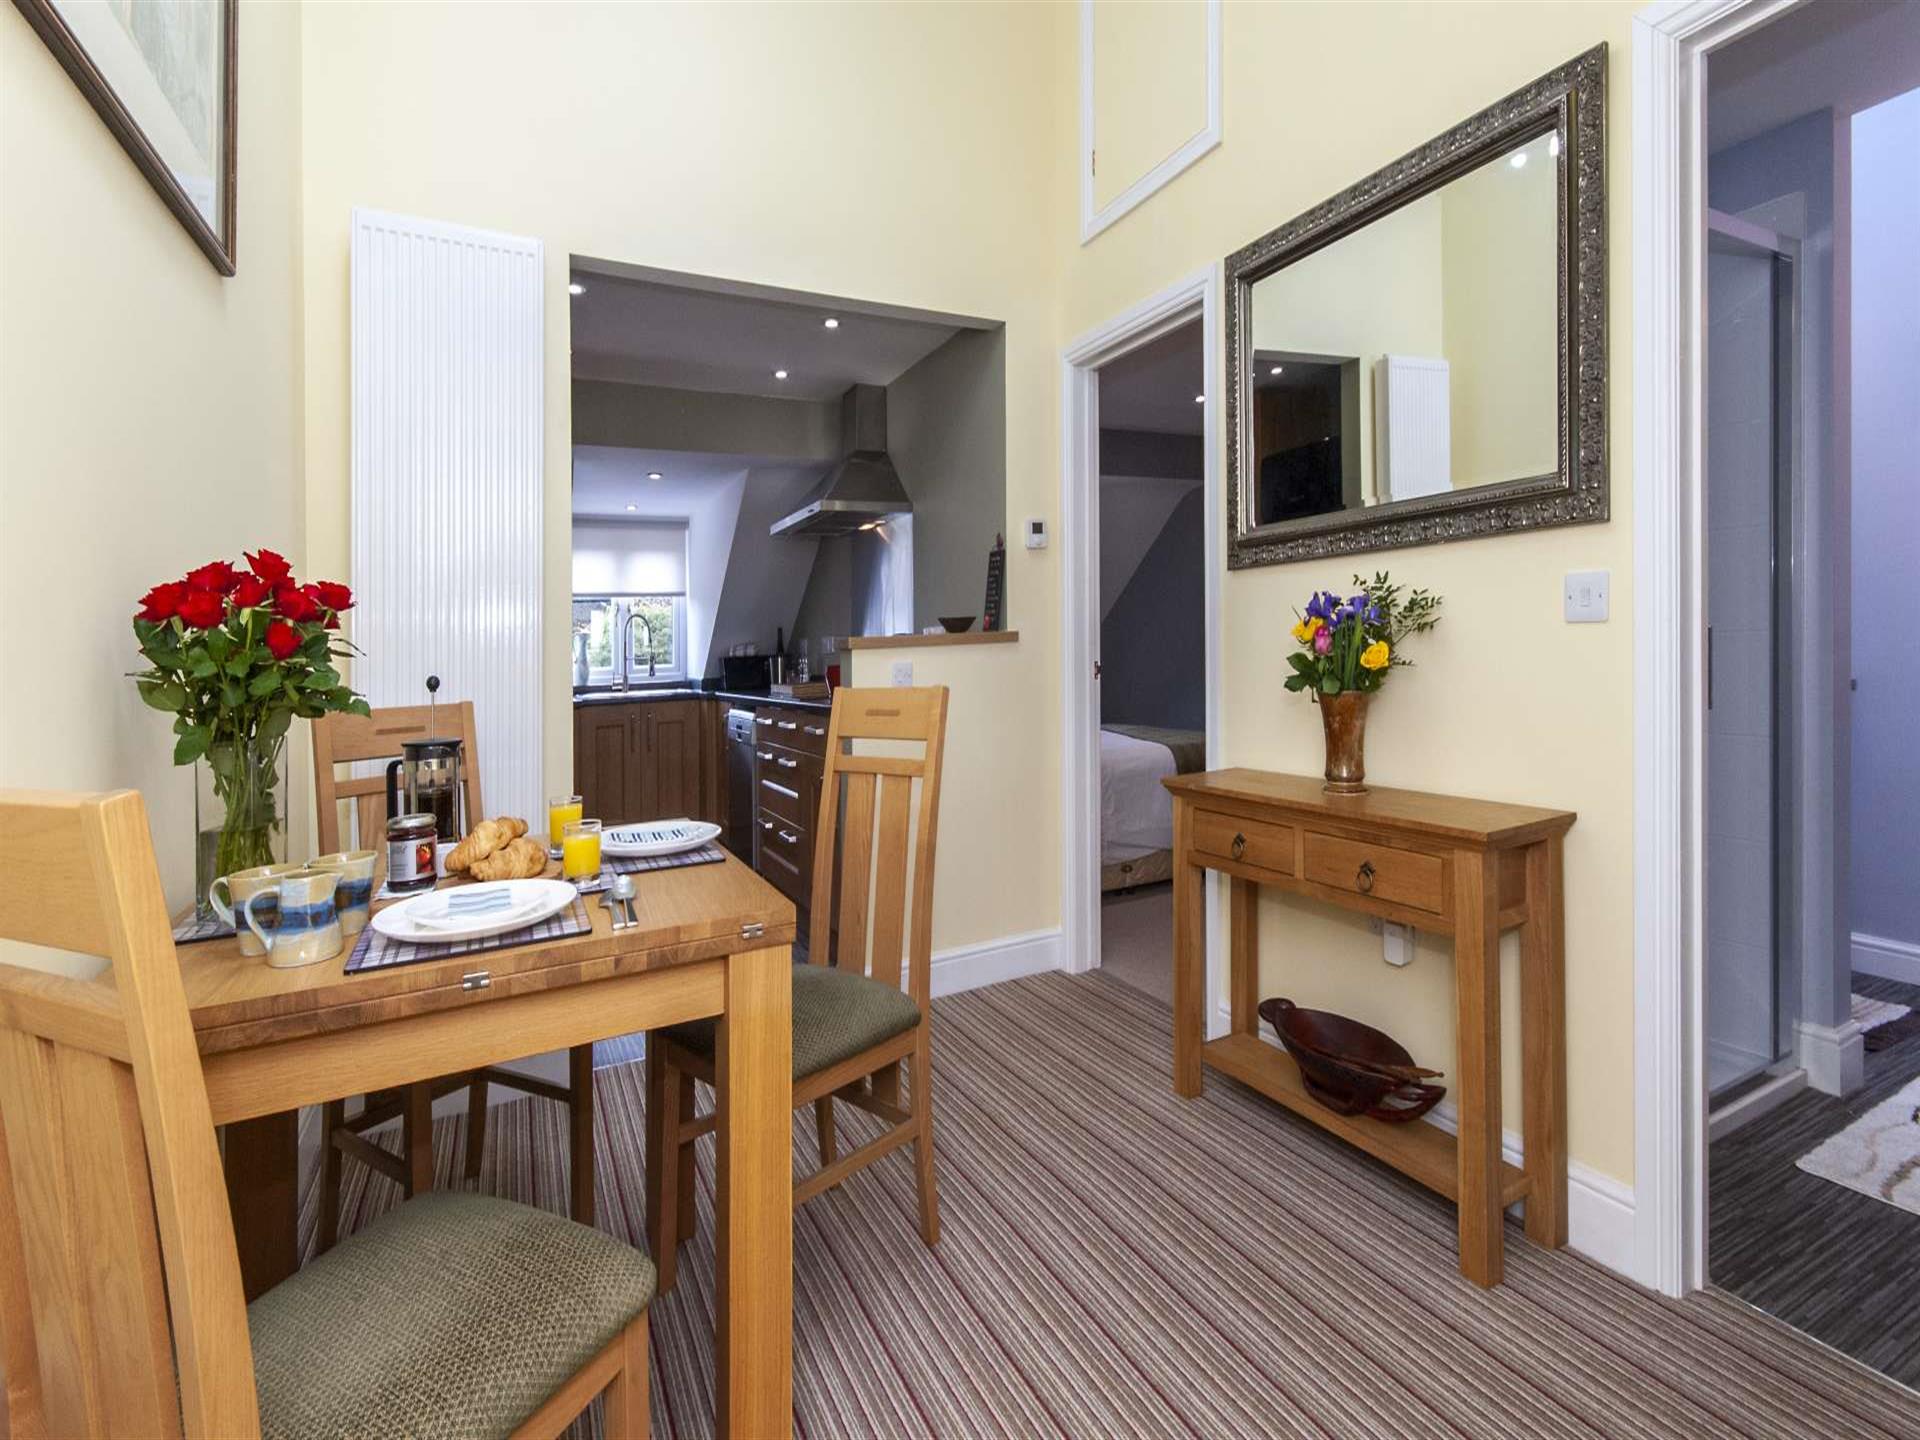 North Pembrokeshire luxury self catering apartment